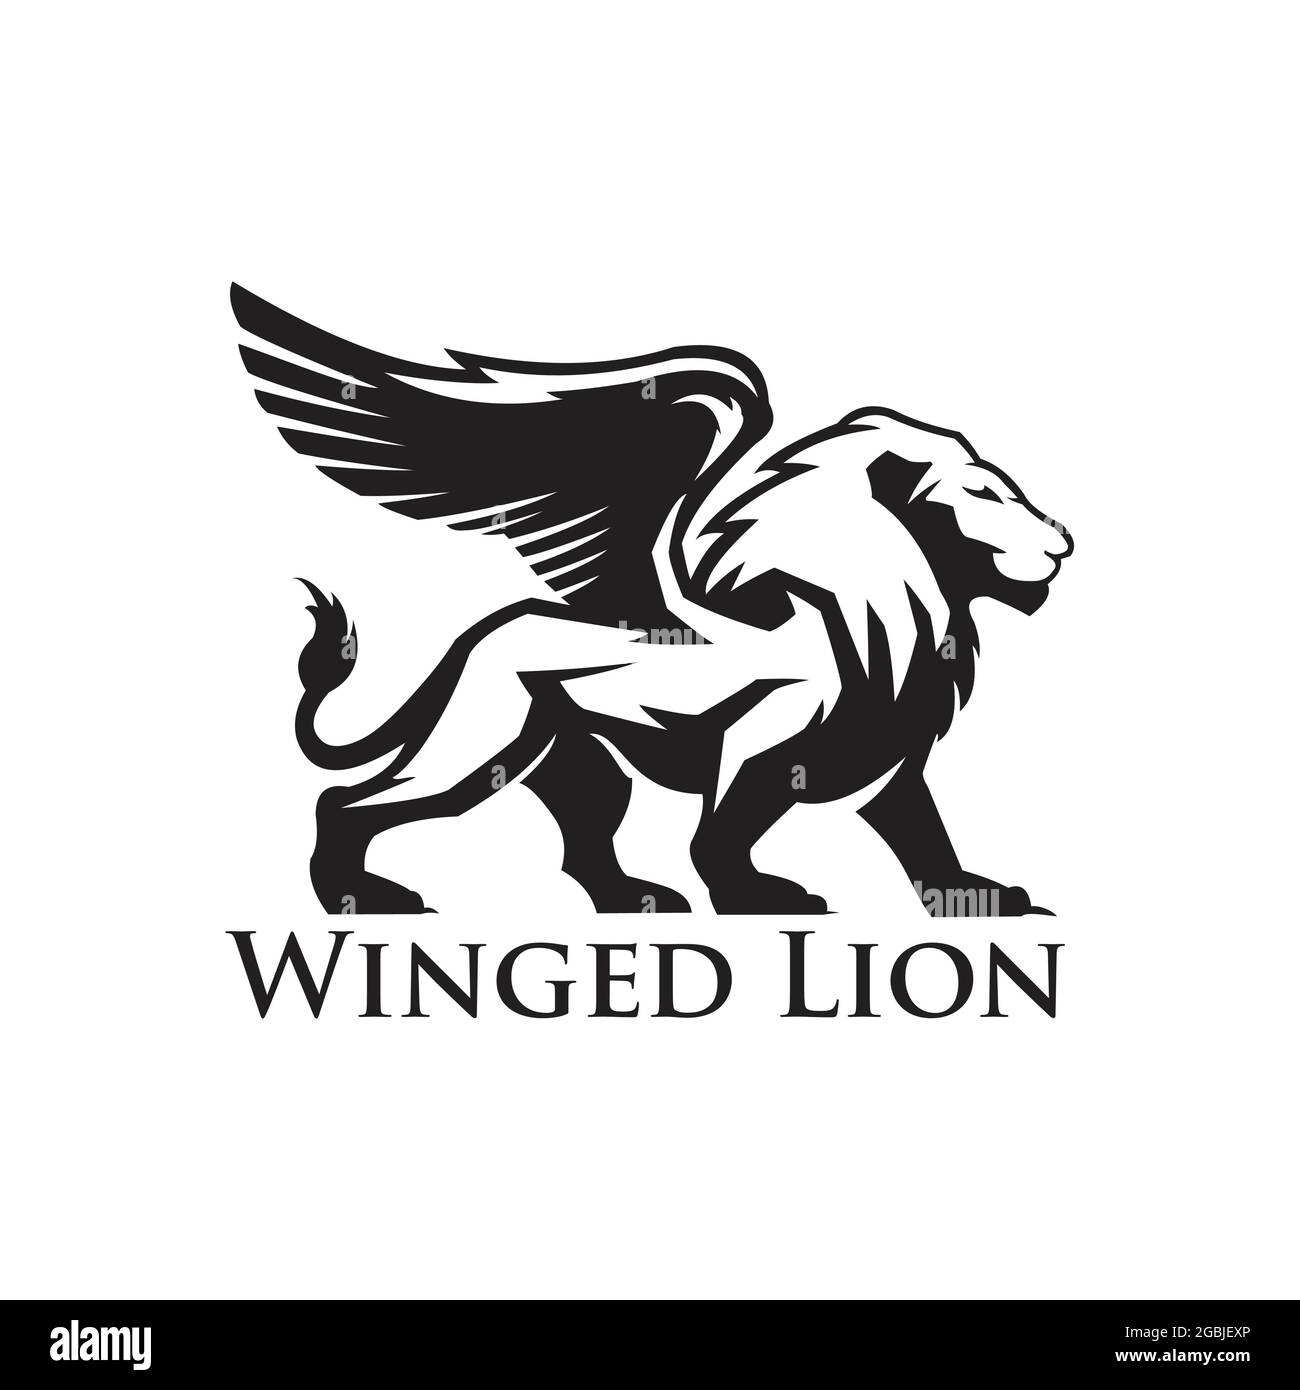 winged lion tattoo logo exclusive design inspiration Stock Vector